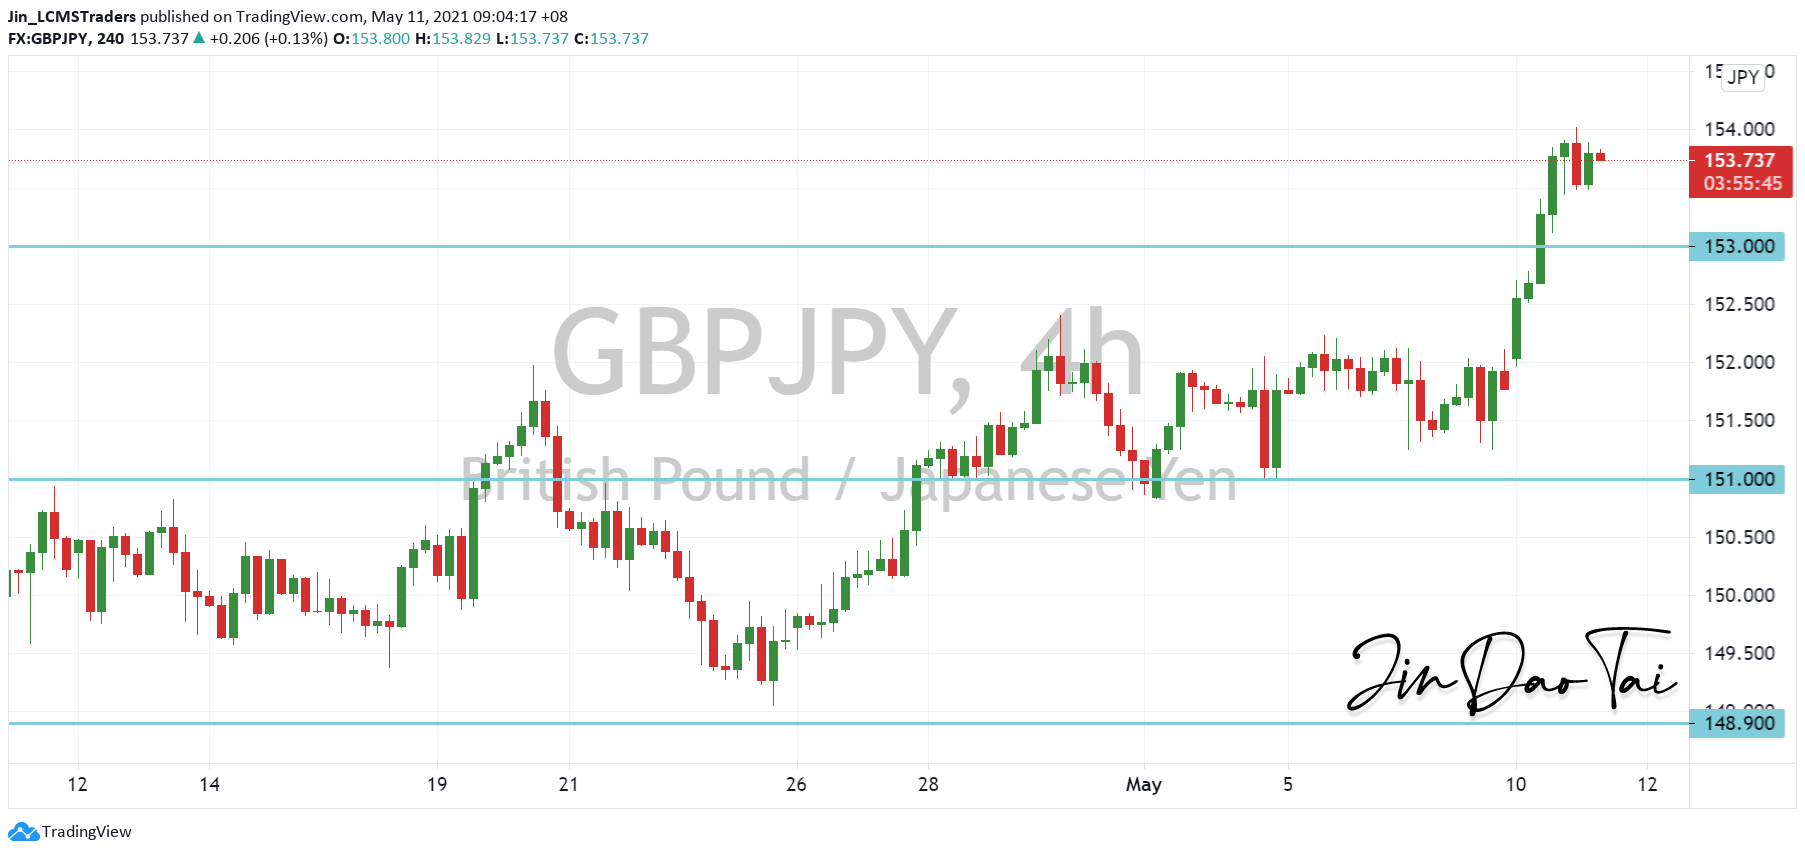 GBP/JPY Outlook (11 May 2021)